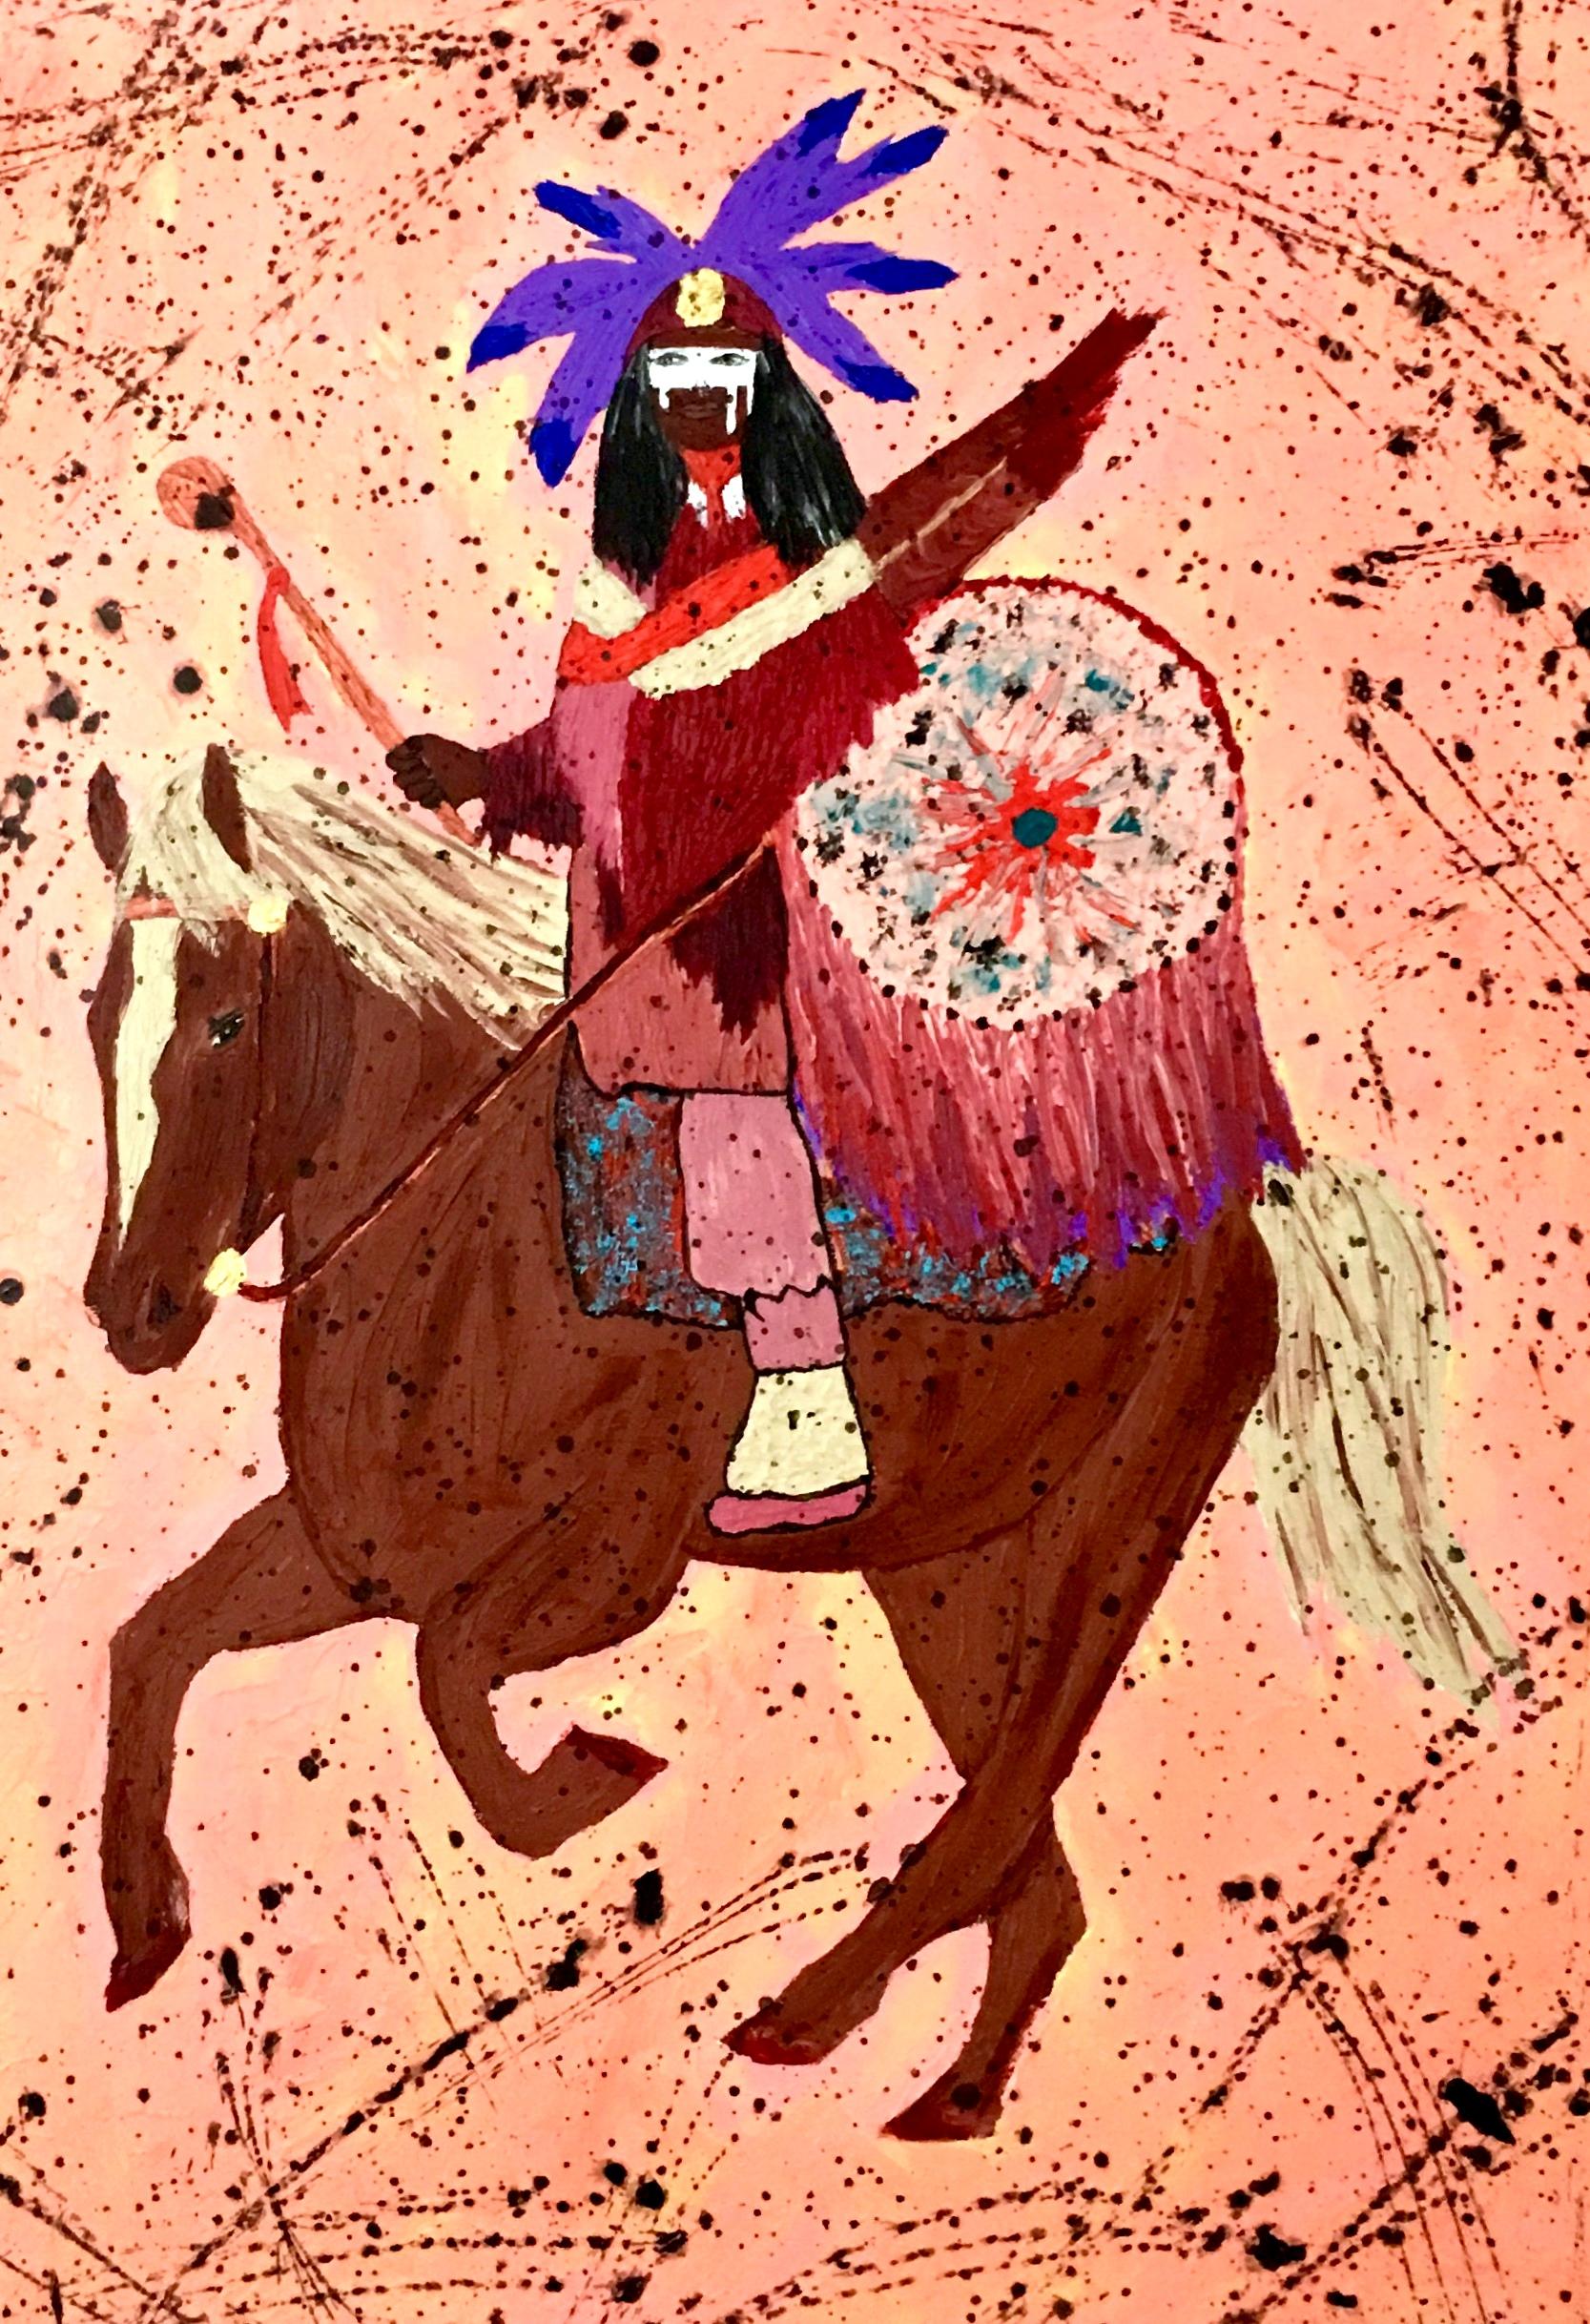 20th century oil on canvas painting by, Barbara Smith. This vibrant artist-signed original piece of art features vibrant and textured hues with a pink ground. The depiction of the Native American Indian on horse is executed with great detail. Signed